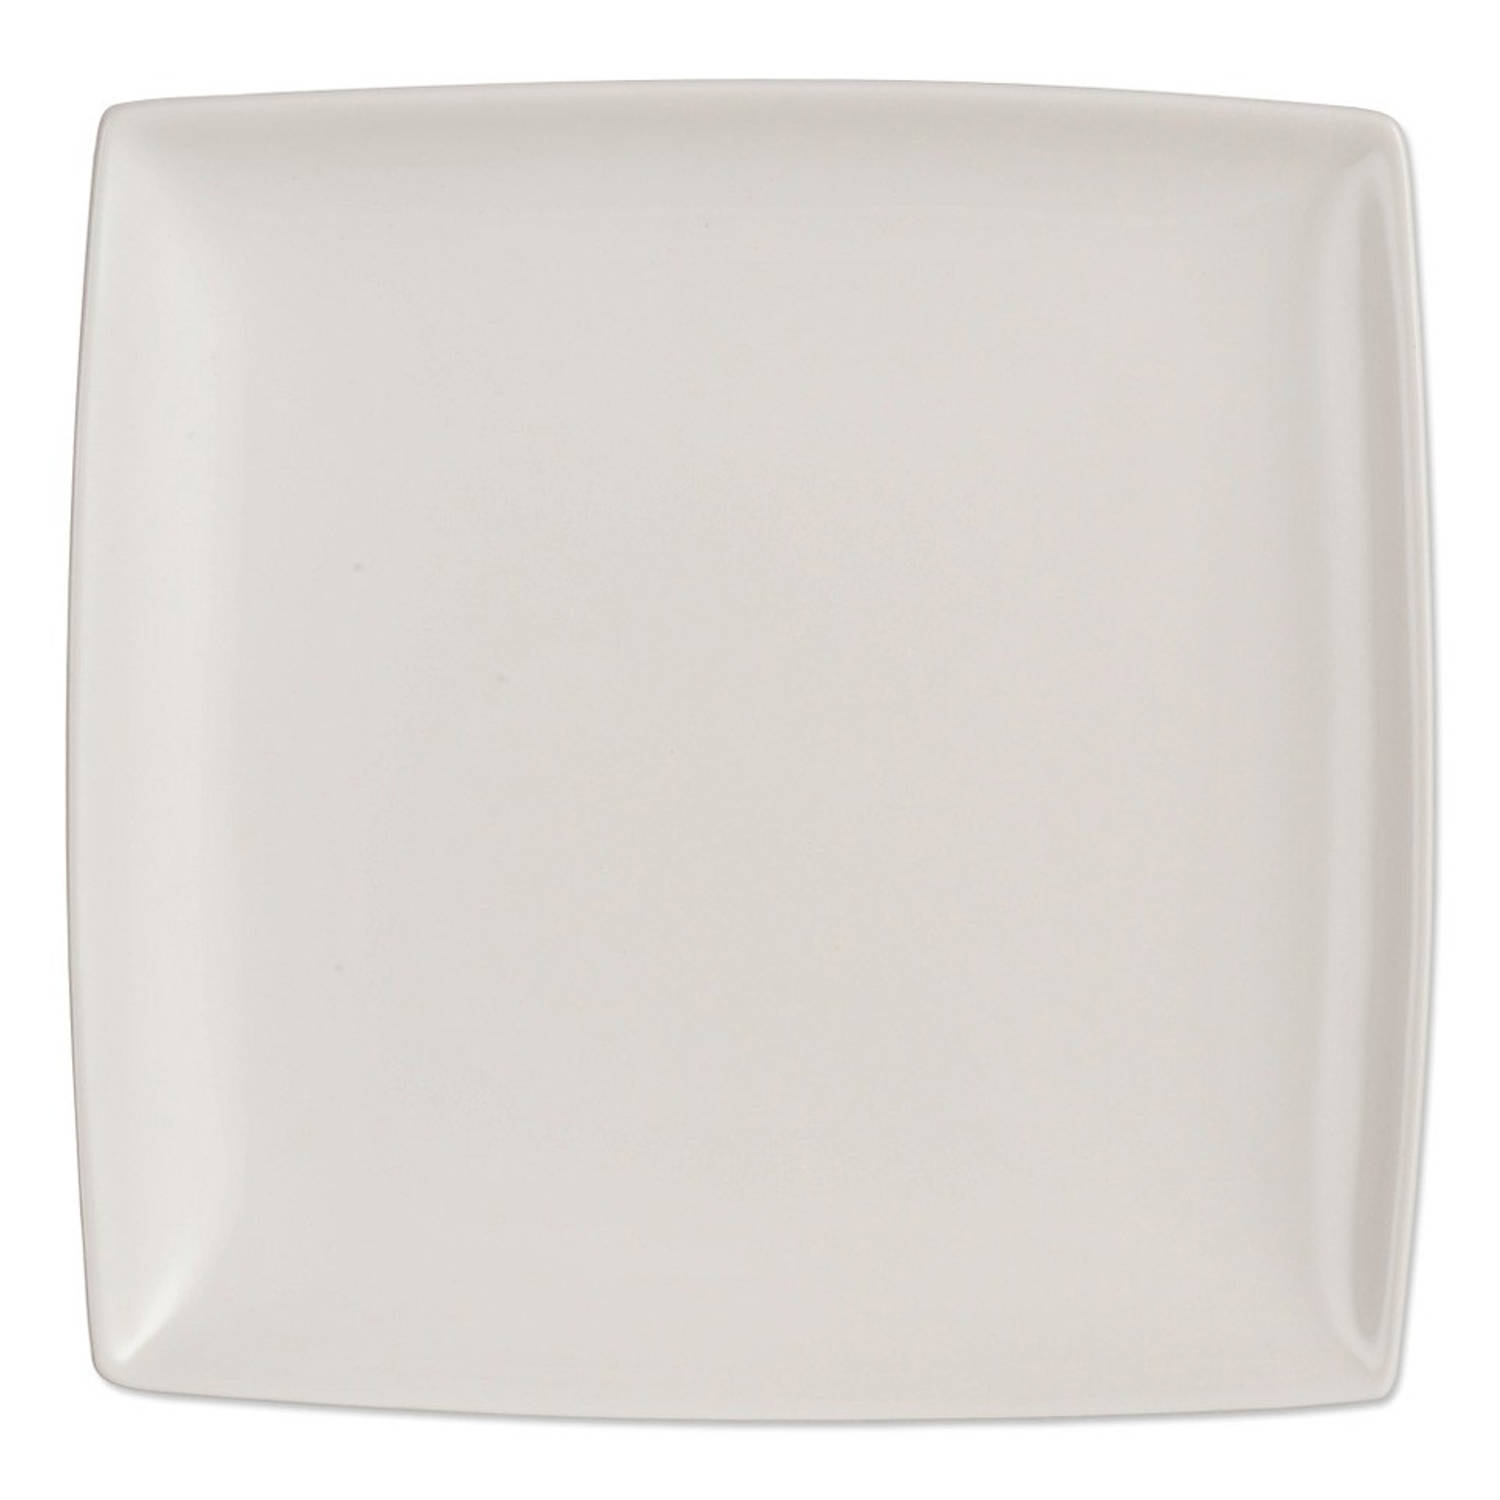 Yong Squito Dinerbord - 16 x 16 cm -  Plat - Wit